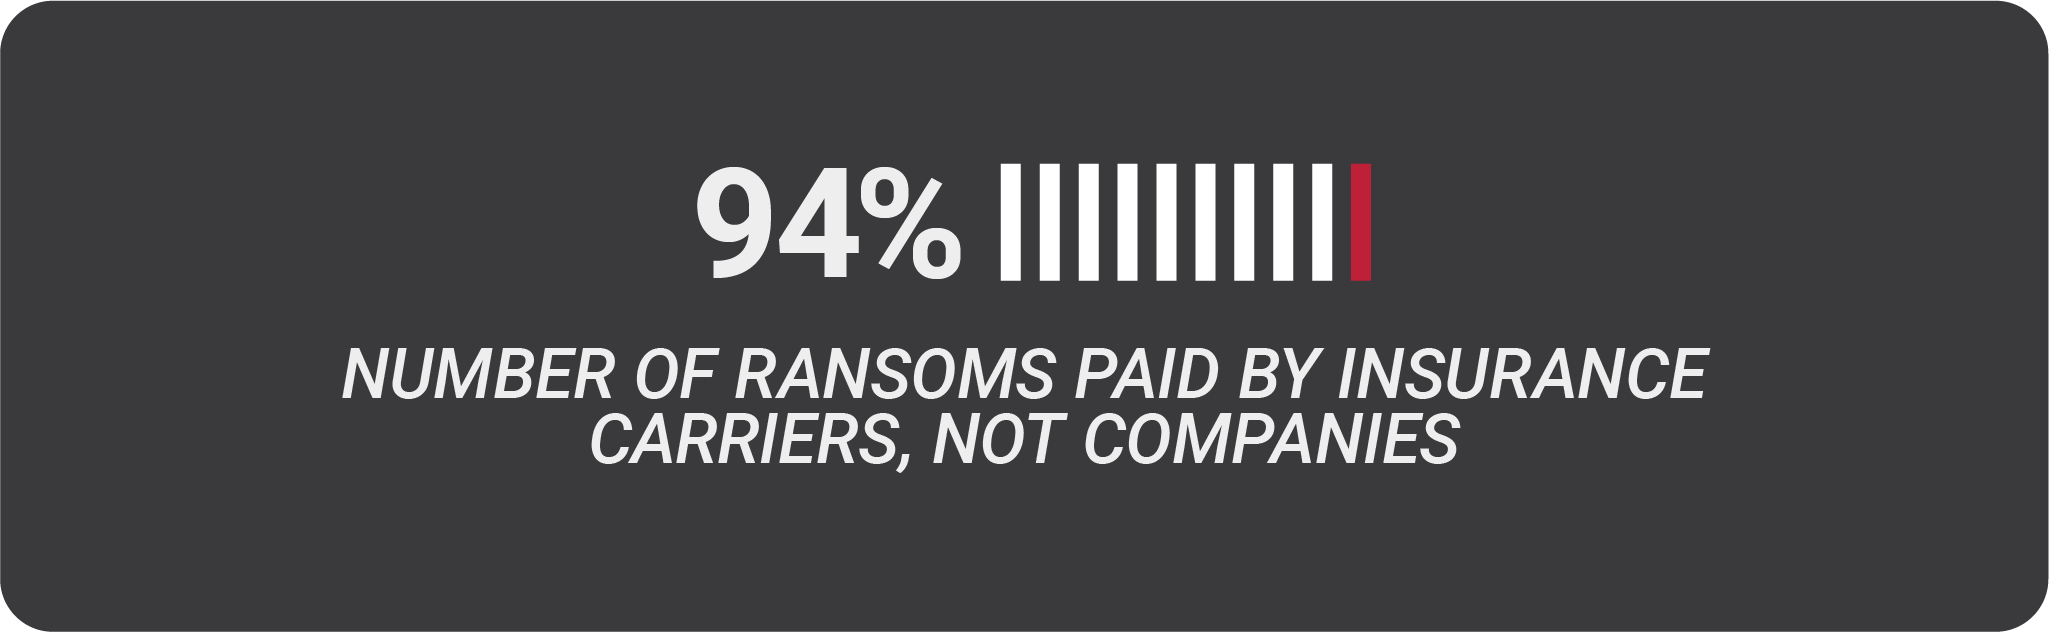 Ransoms paid by insurance carriers